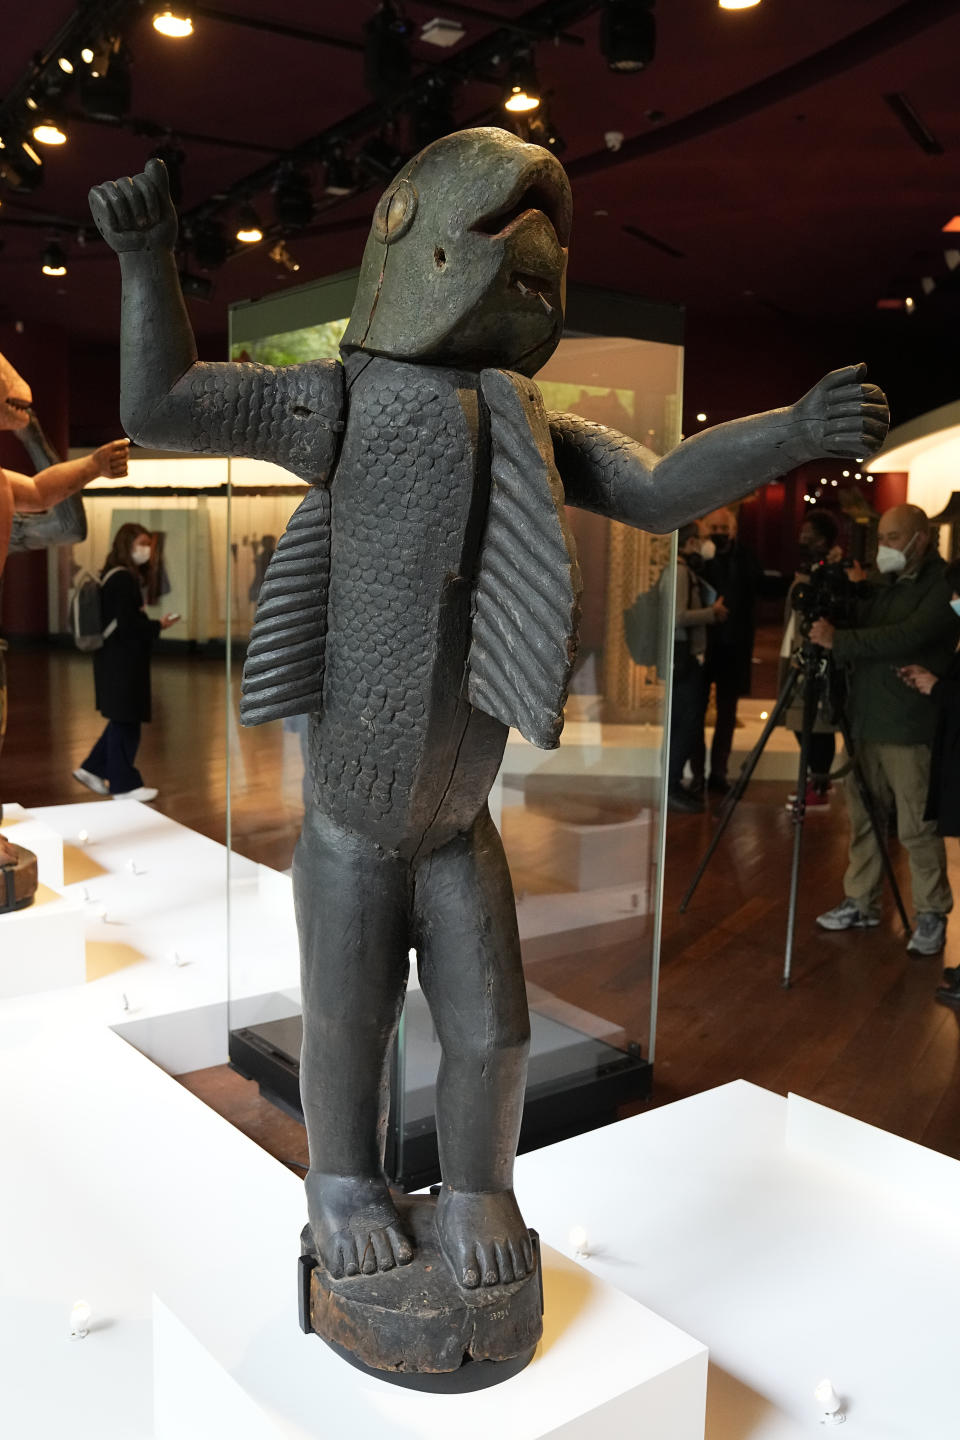 The royal statue half-man, half-shark of Benin's 19th century King Behanzin is pictured at the Quai Branly–Jacques Chirac museum, Monday, Oct. 25, 2021 in Paris. In a decision with potential ramifications across European museums, France is displaying 26 looted colonial-era artifacts for one last time before returning them home to Benin. The wooden anthropomorphic statues, royal thrones and sacred altars were pilfered by the French army in the 19th century from Western Africa. (AP Photo/Michel Euler)